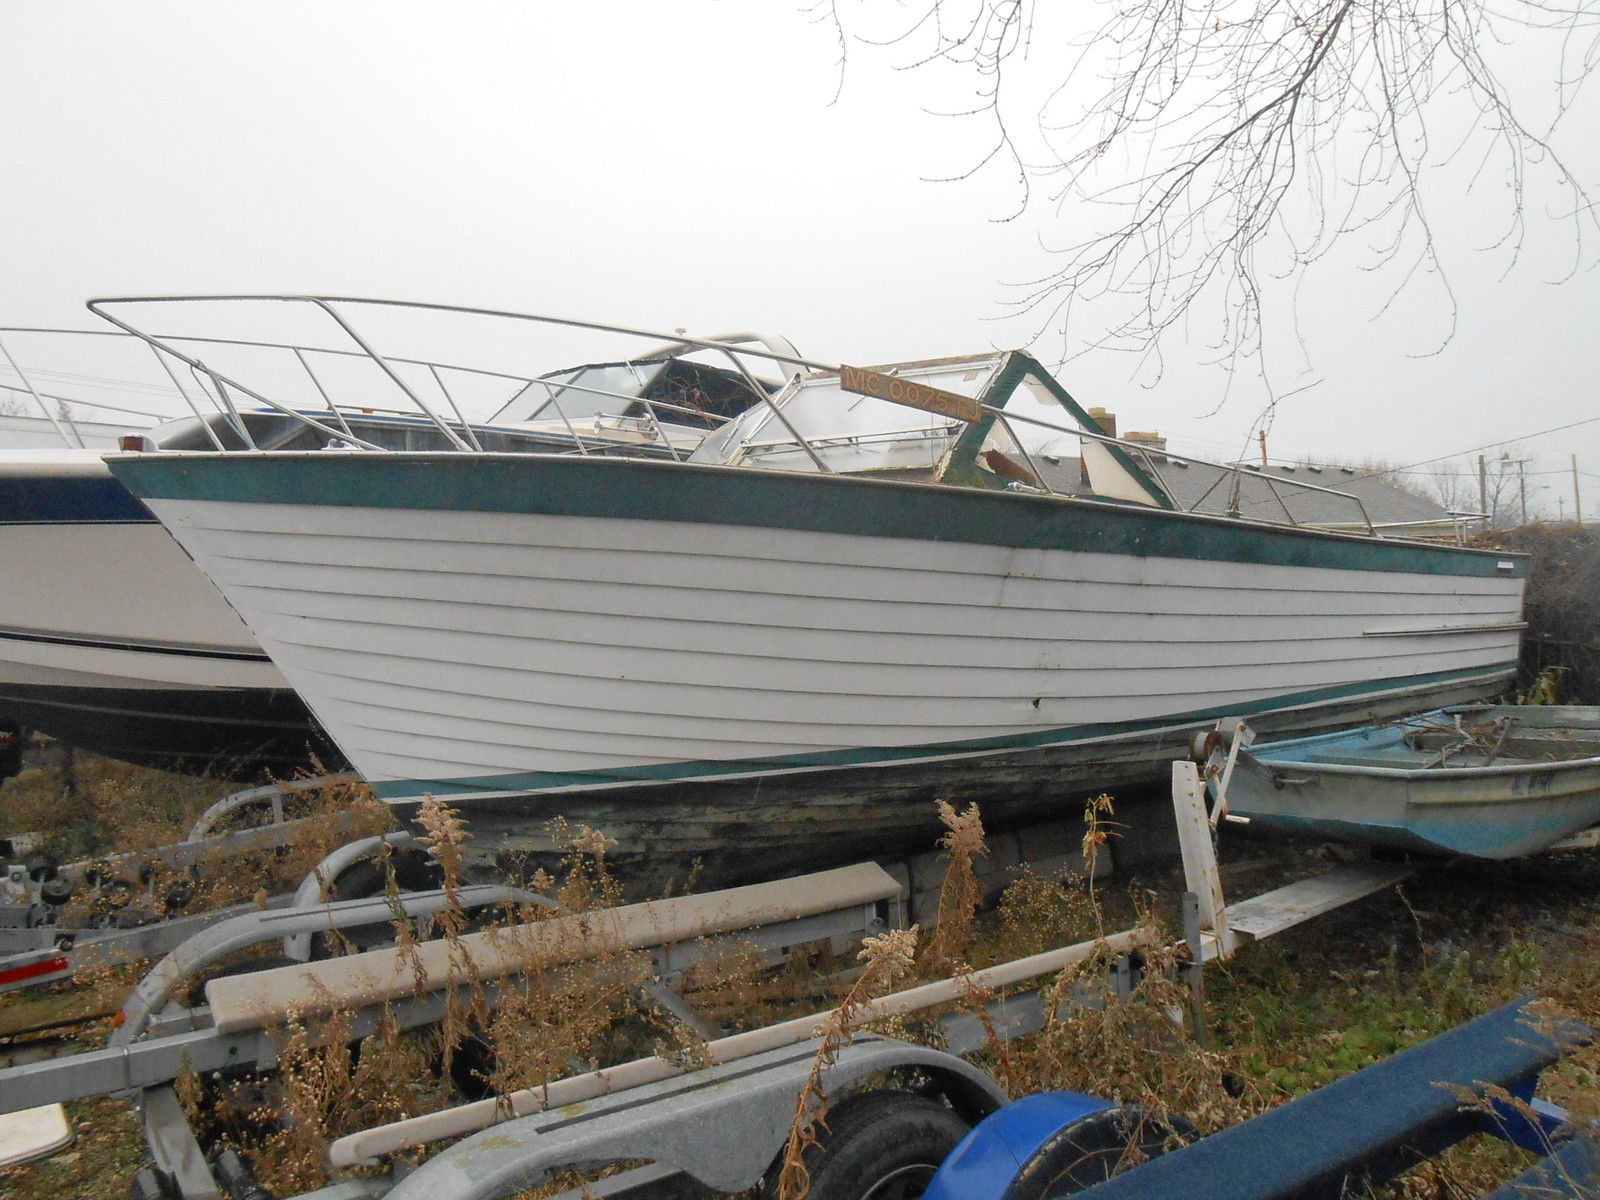 Chris Craft Sea Skiff 1967 for sale for $500 - Boats-from 